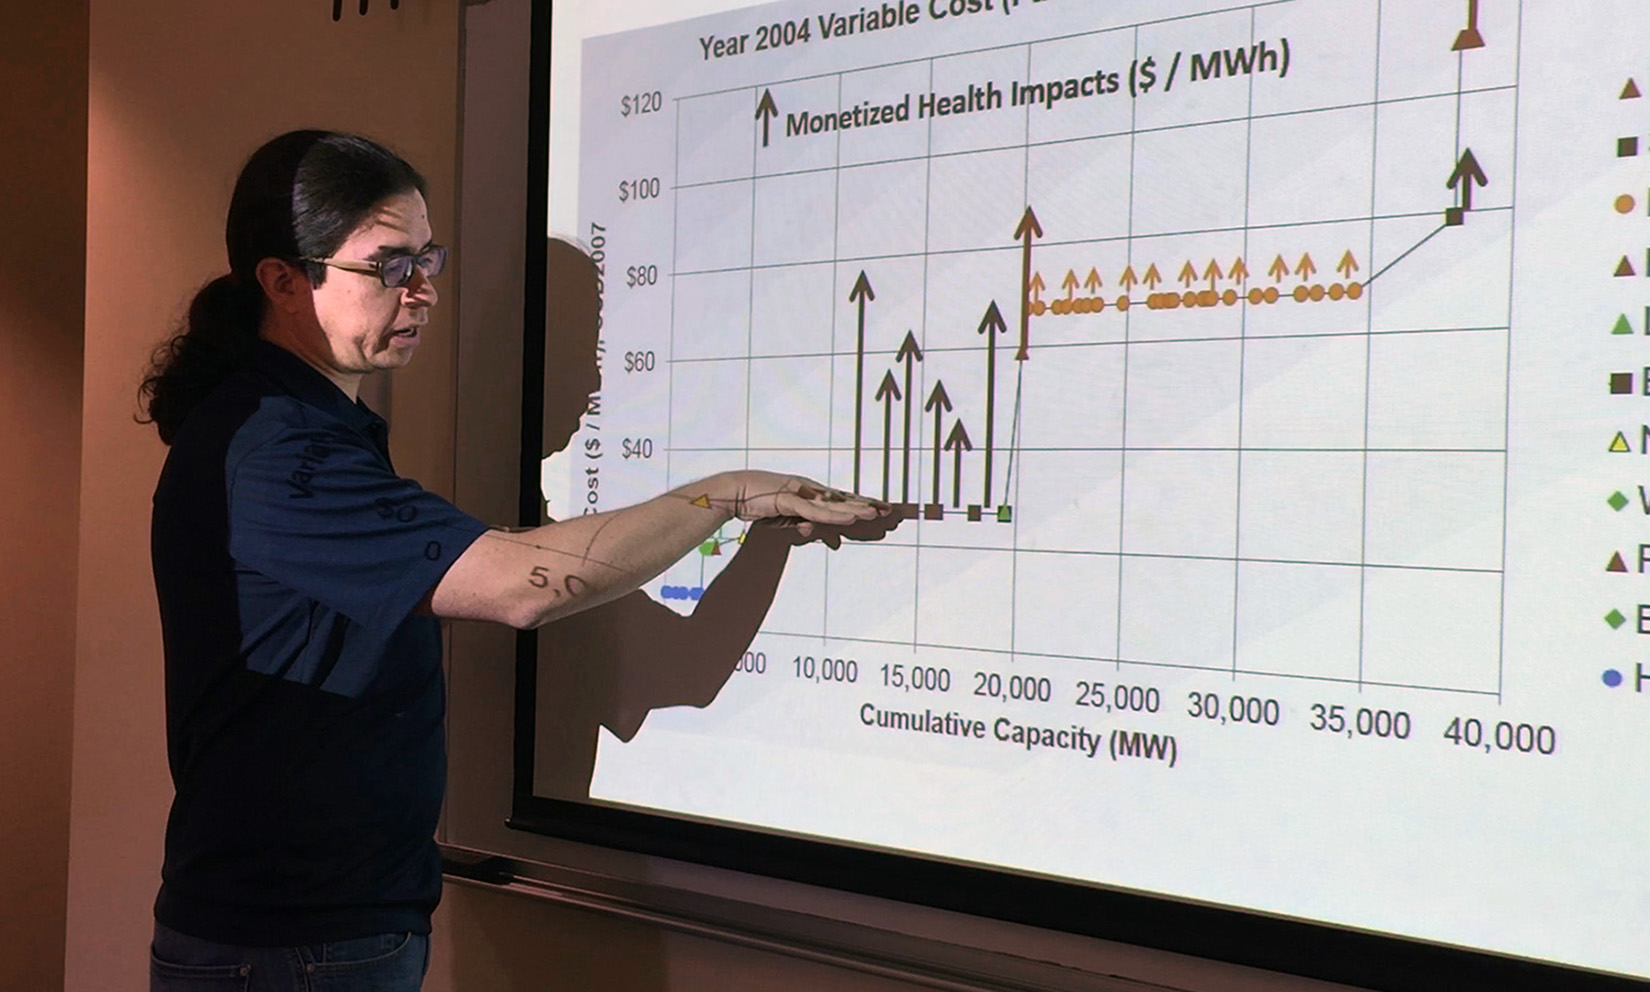 Juan Moreno-Cruz, assistant professor in the Georgia Tech School of Economics, discusses the costs involved in generating facilities using different types of fuel. The research was part of a study aimed at helping utility companies choose their mix of generating facilities to minimize the impact of pollution on population centers. (Credit: John Toon, Georgia Tech)